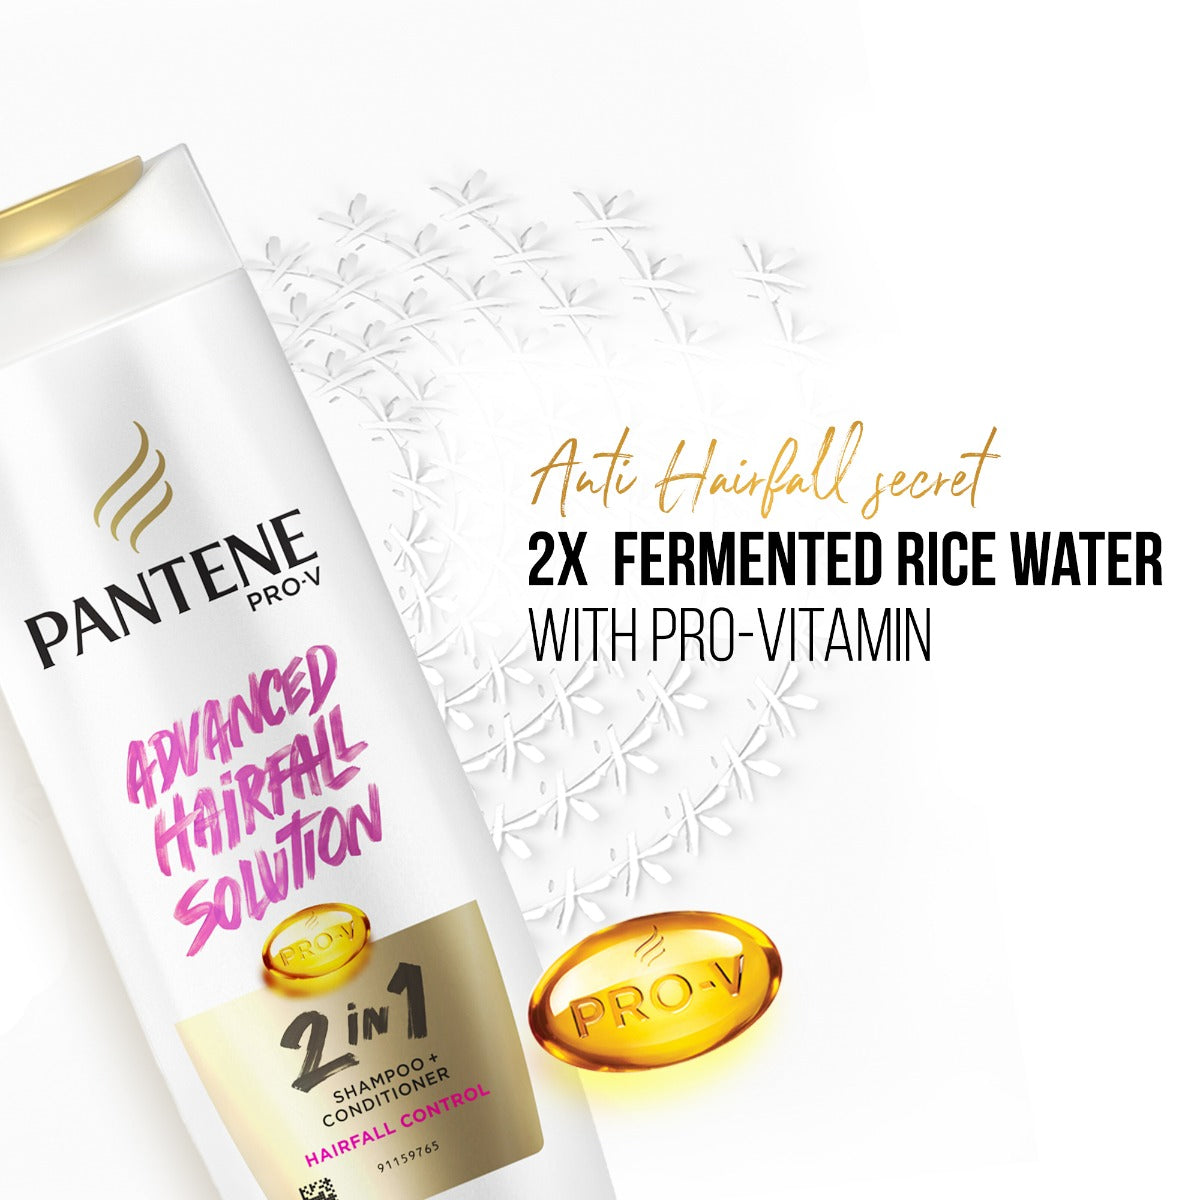 Pantene Advanced Hairfall Solution 2in1 Anti-Hairfall Shampoo and Conditioner for Women